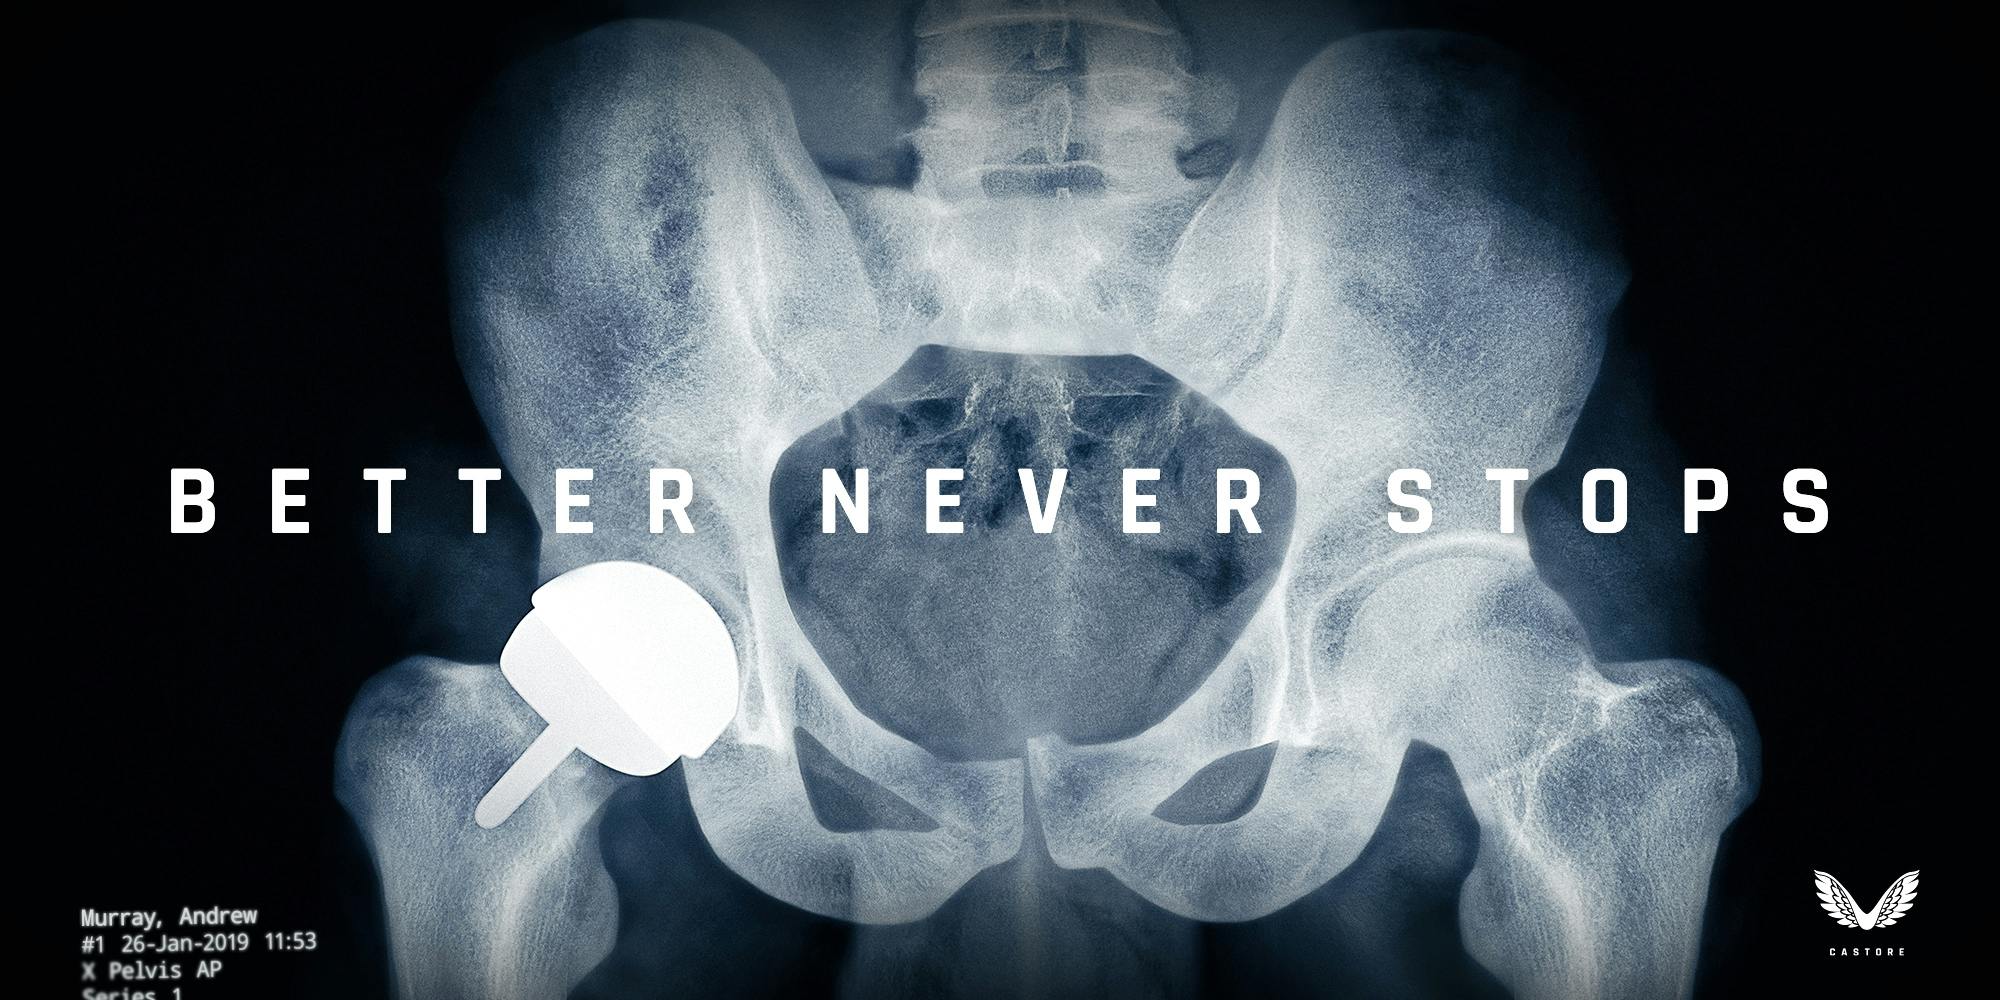 An X-ray image of Andy Murray's pelvis with the text "Better never stops" displayed across the centre.